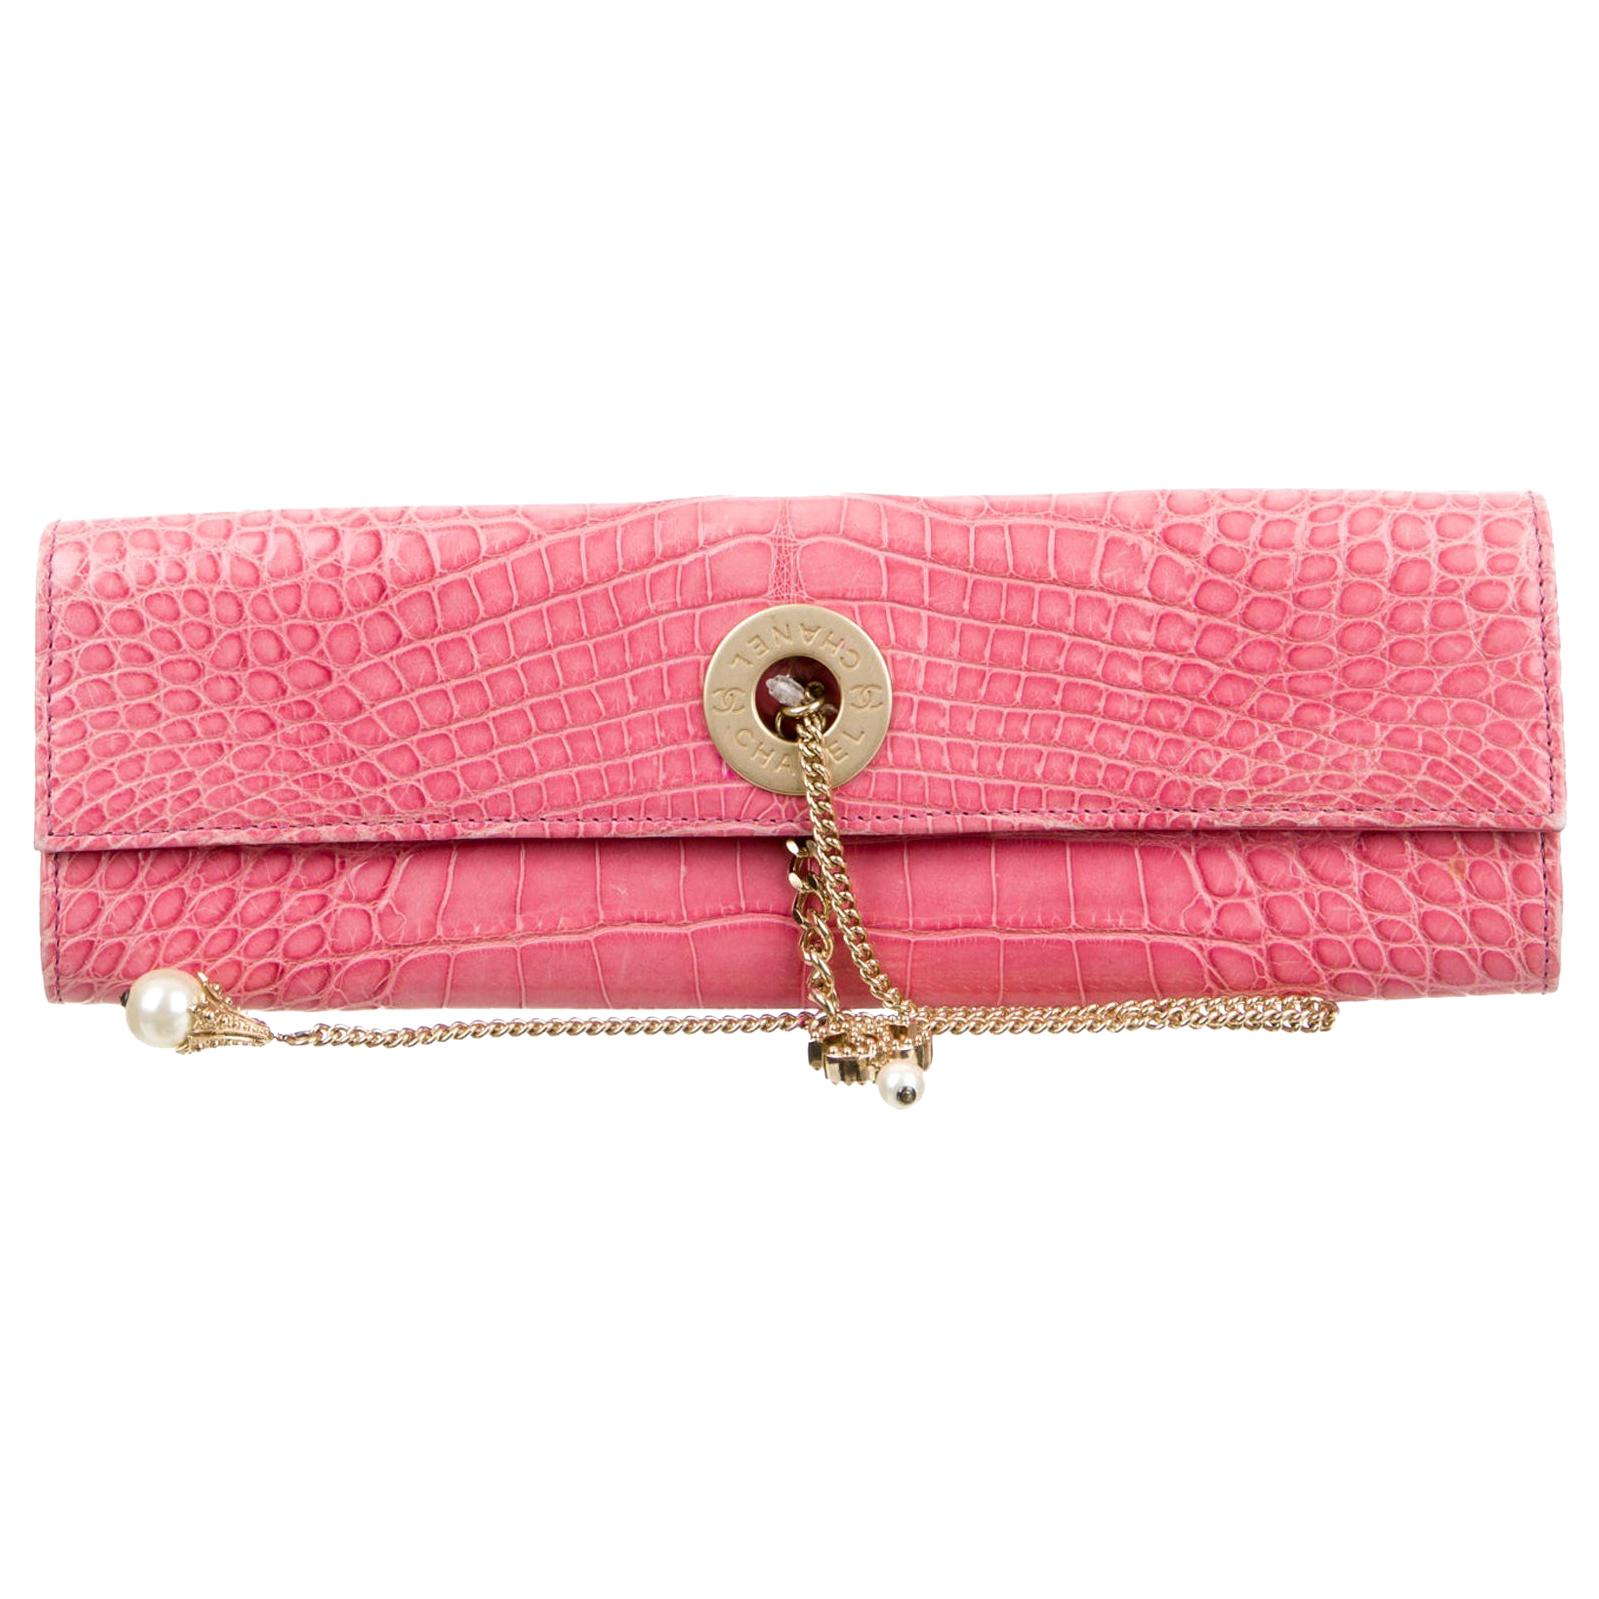 Chanel NEW Pink Crocodile Exotic Gold Chain Envelope Evening Clutch Flap Bag